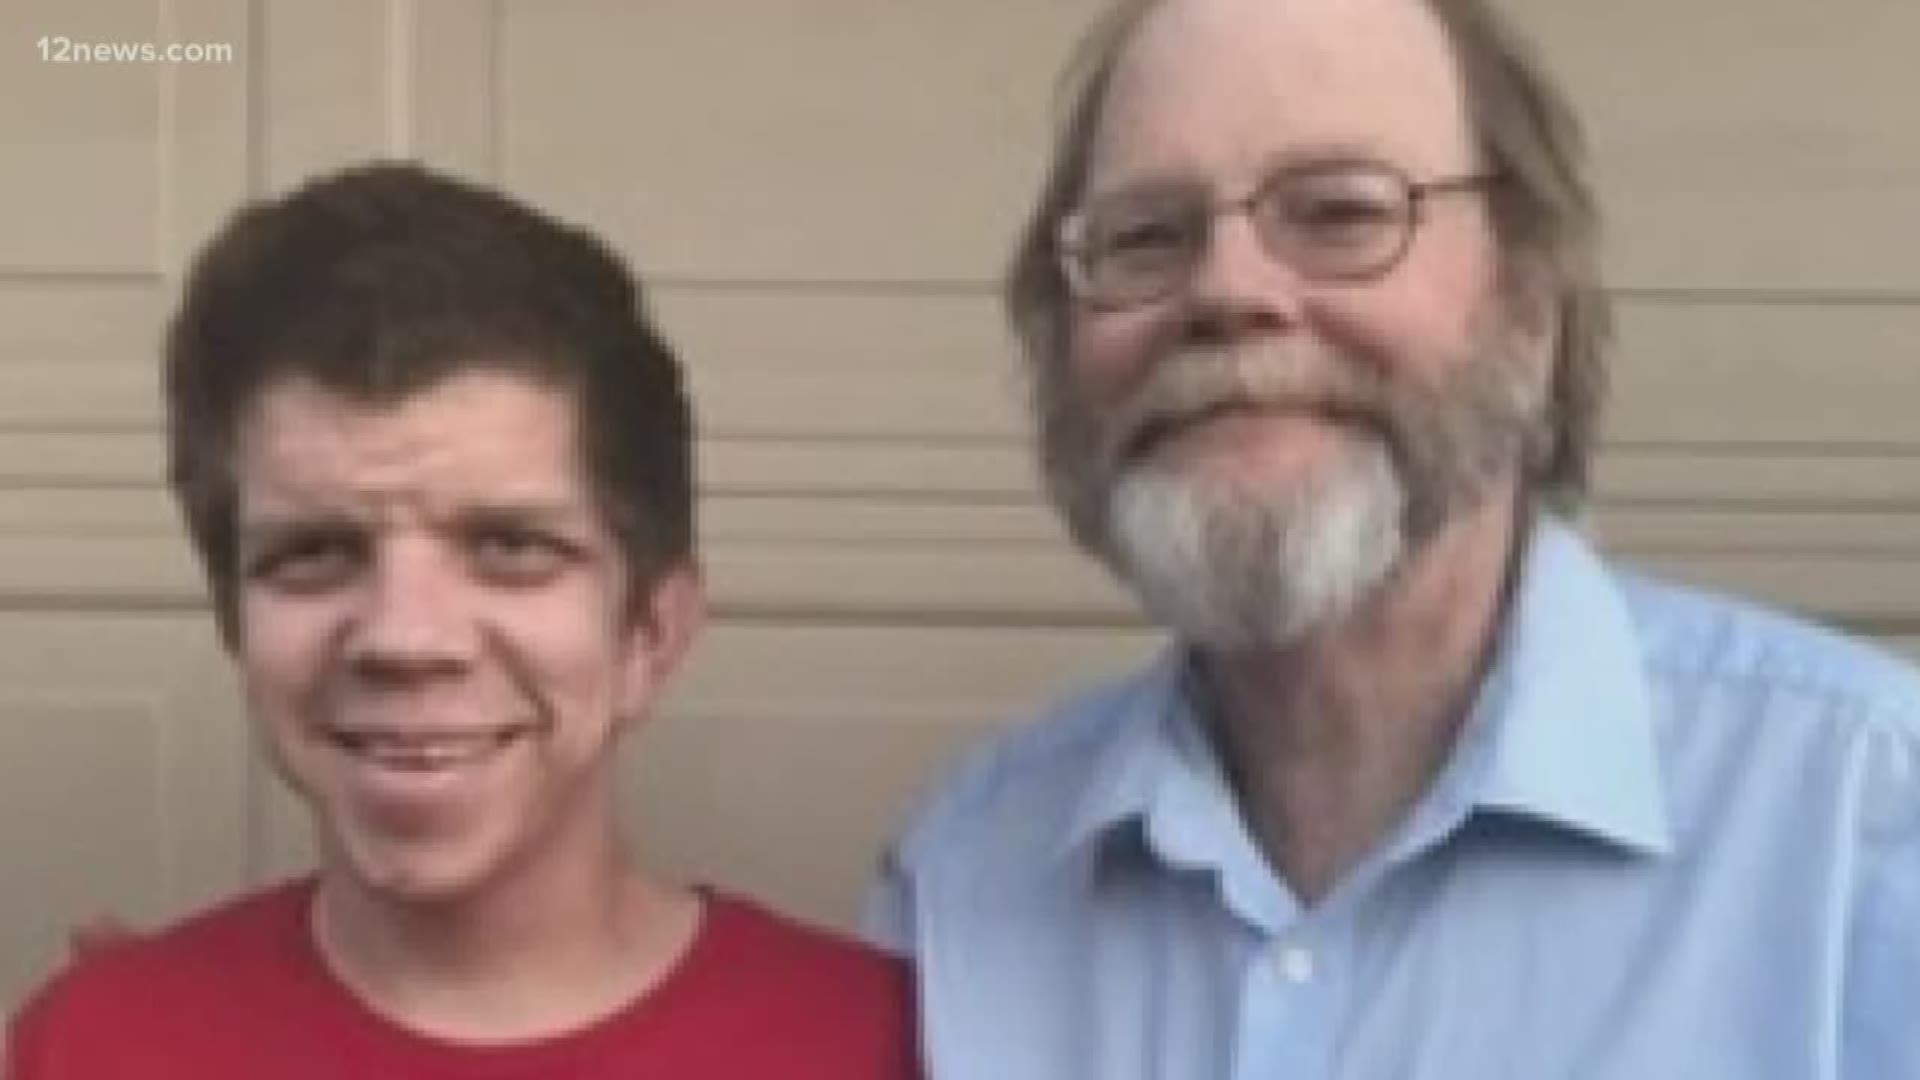 A 66-year-old man and his 29-year-old son with special needs died in the fire early Tuesday morning, according to officials.